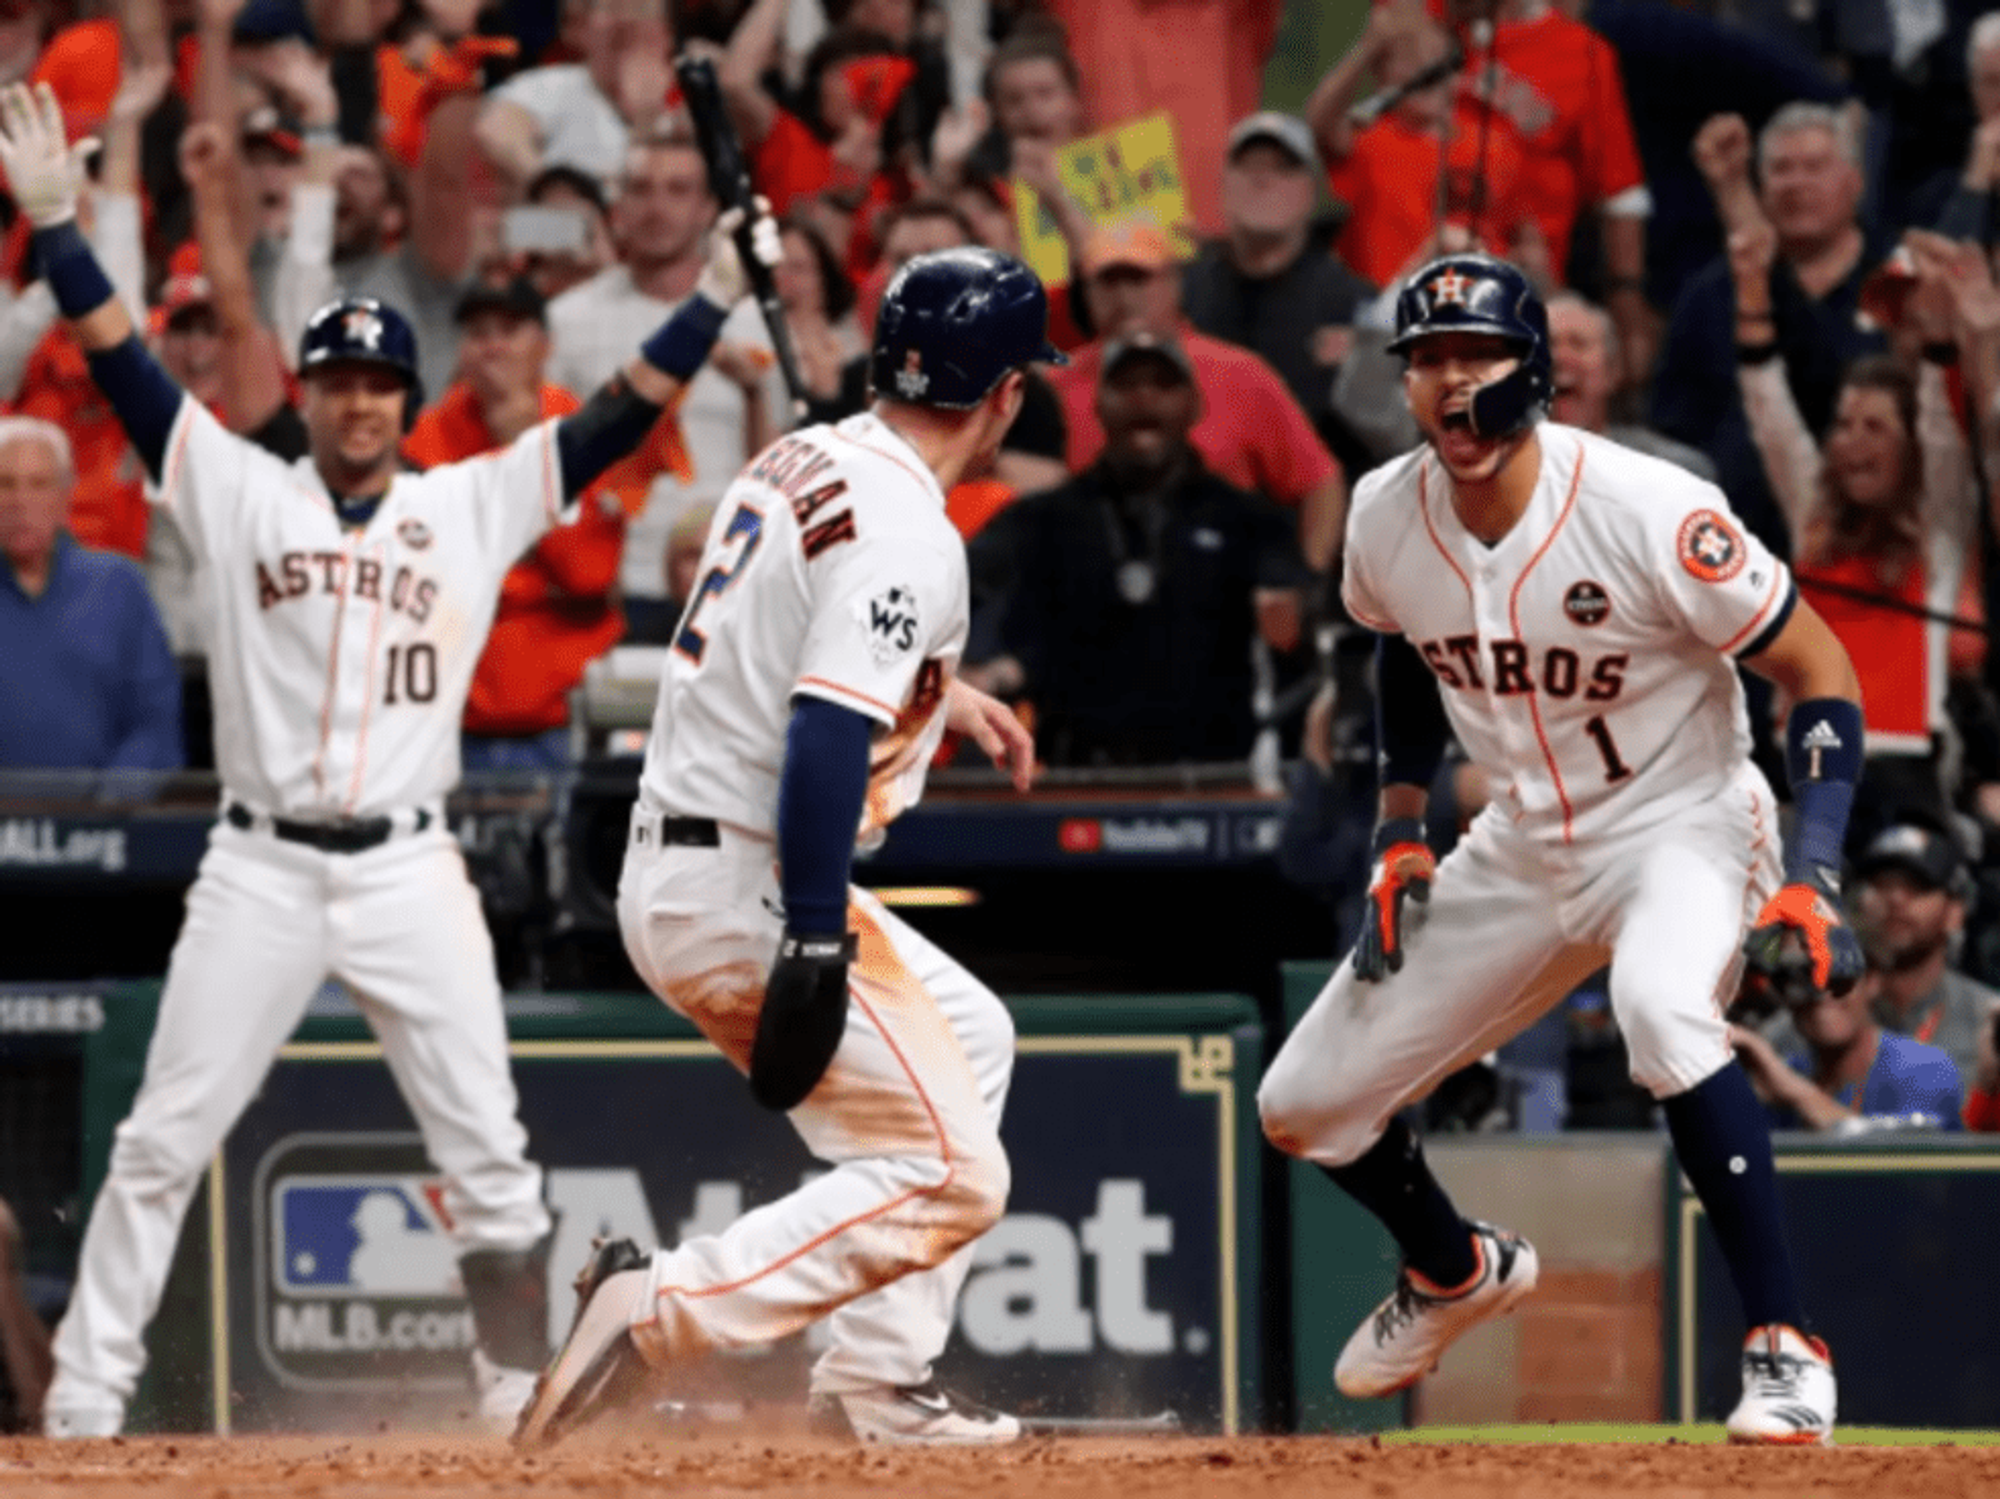 Houston Astros celebrate win after World Series Game 5